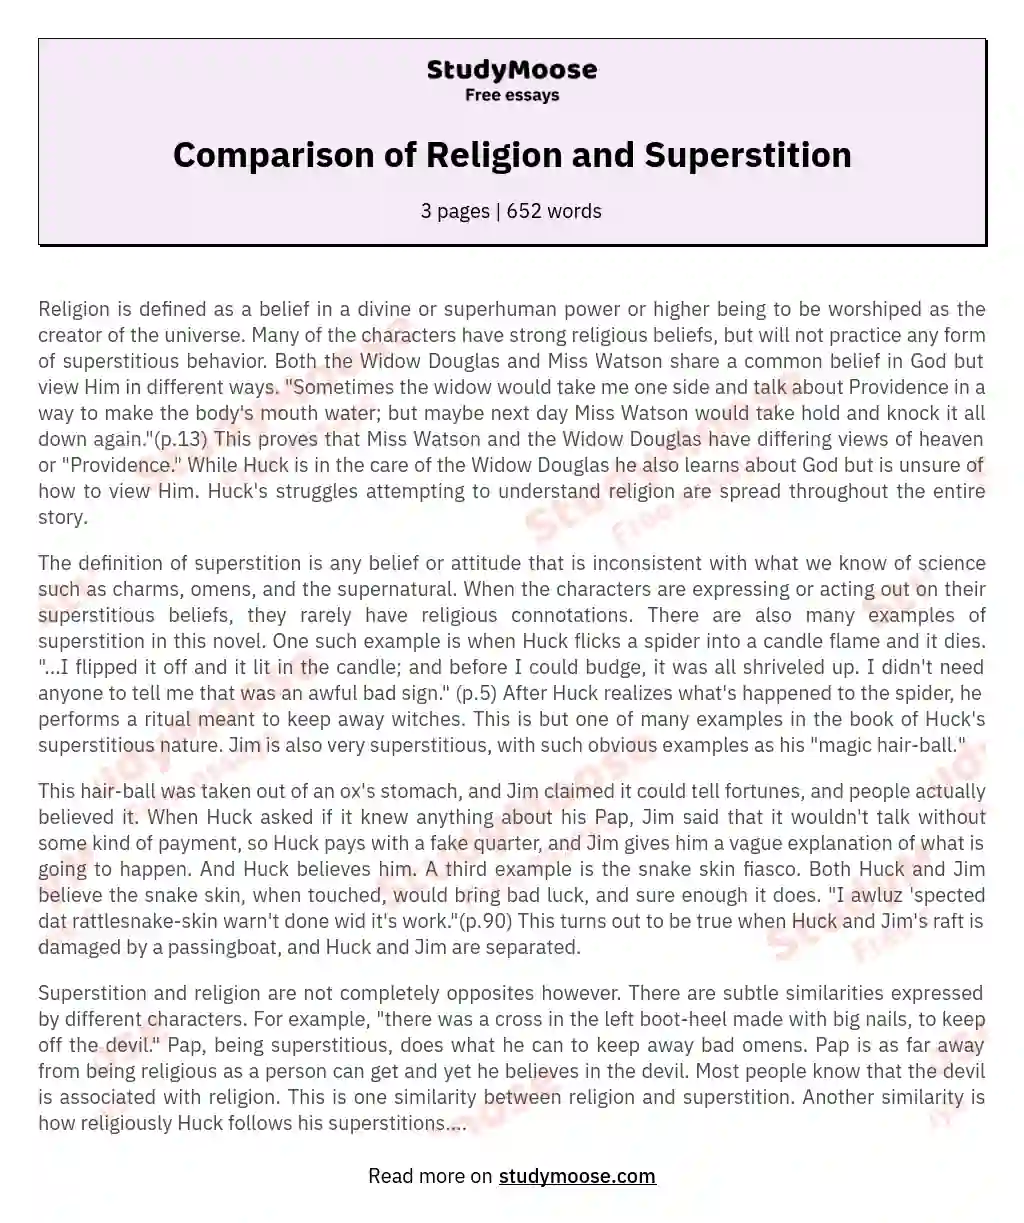 Comparison of Religion and Superstition essay